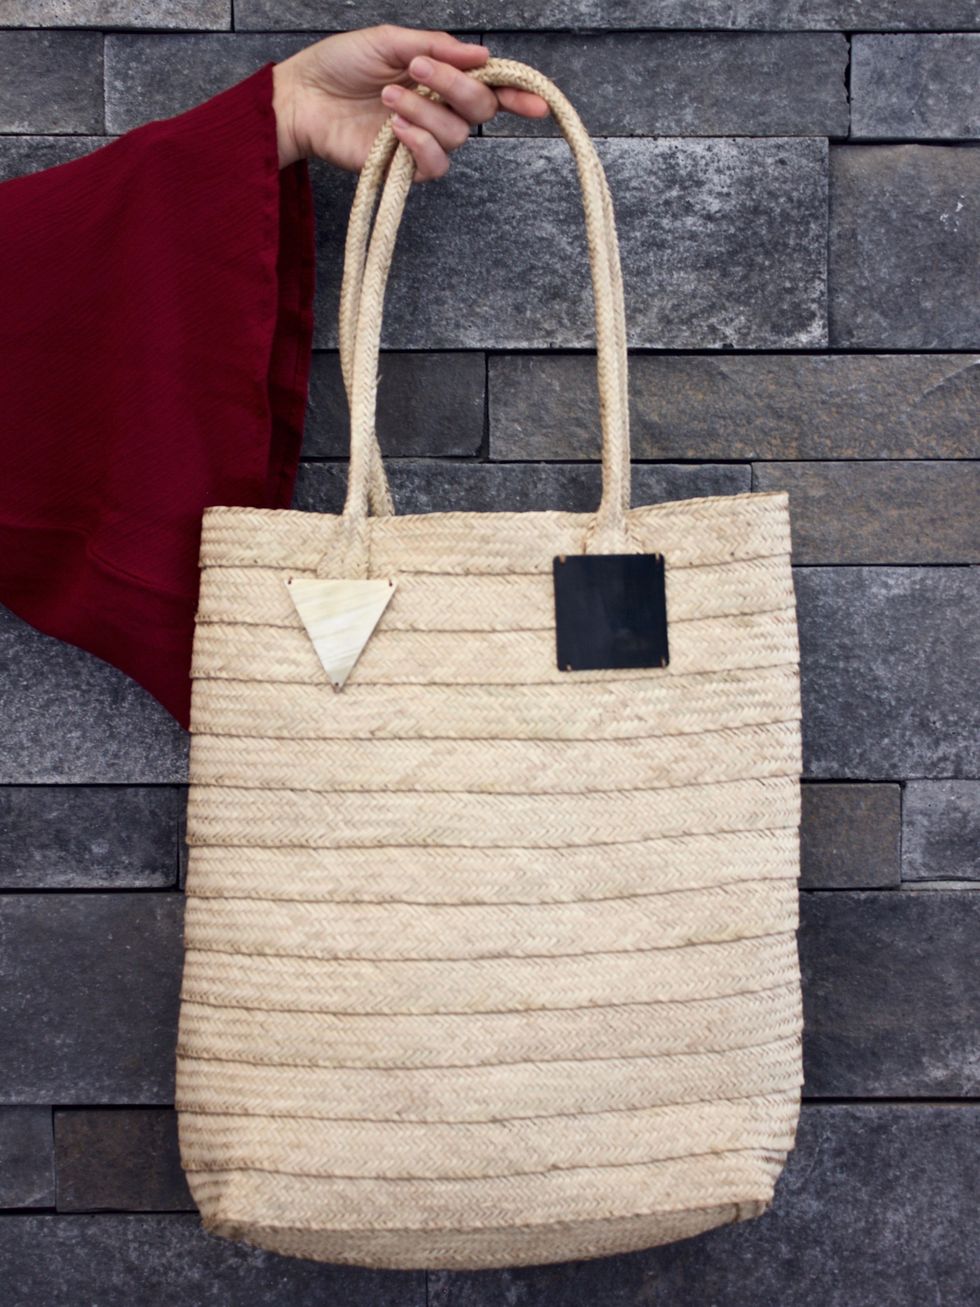 This Jane Birkin-Inspired Summer Staple Is Making a Major Comeback - Why  Woven Handbags Are the Perfect Summer Purse